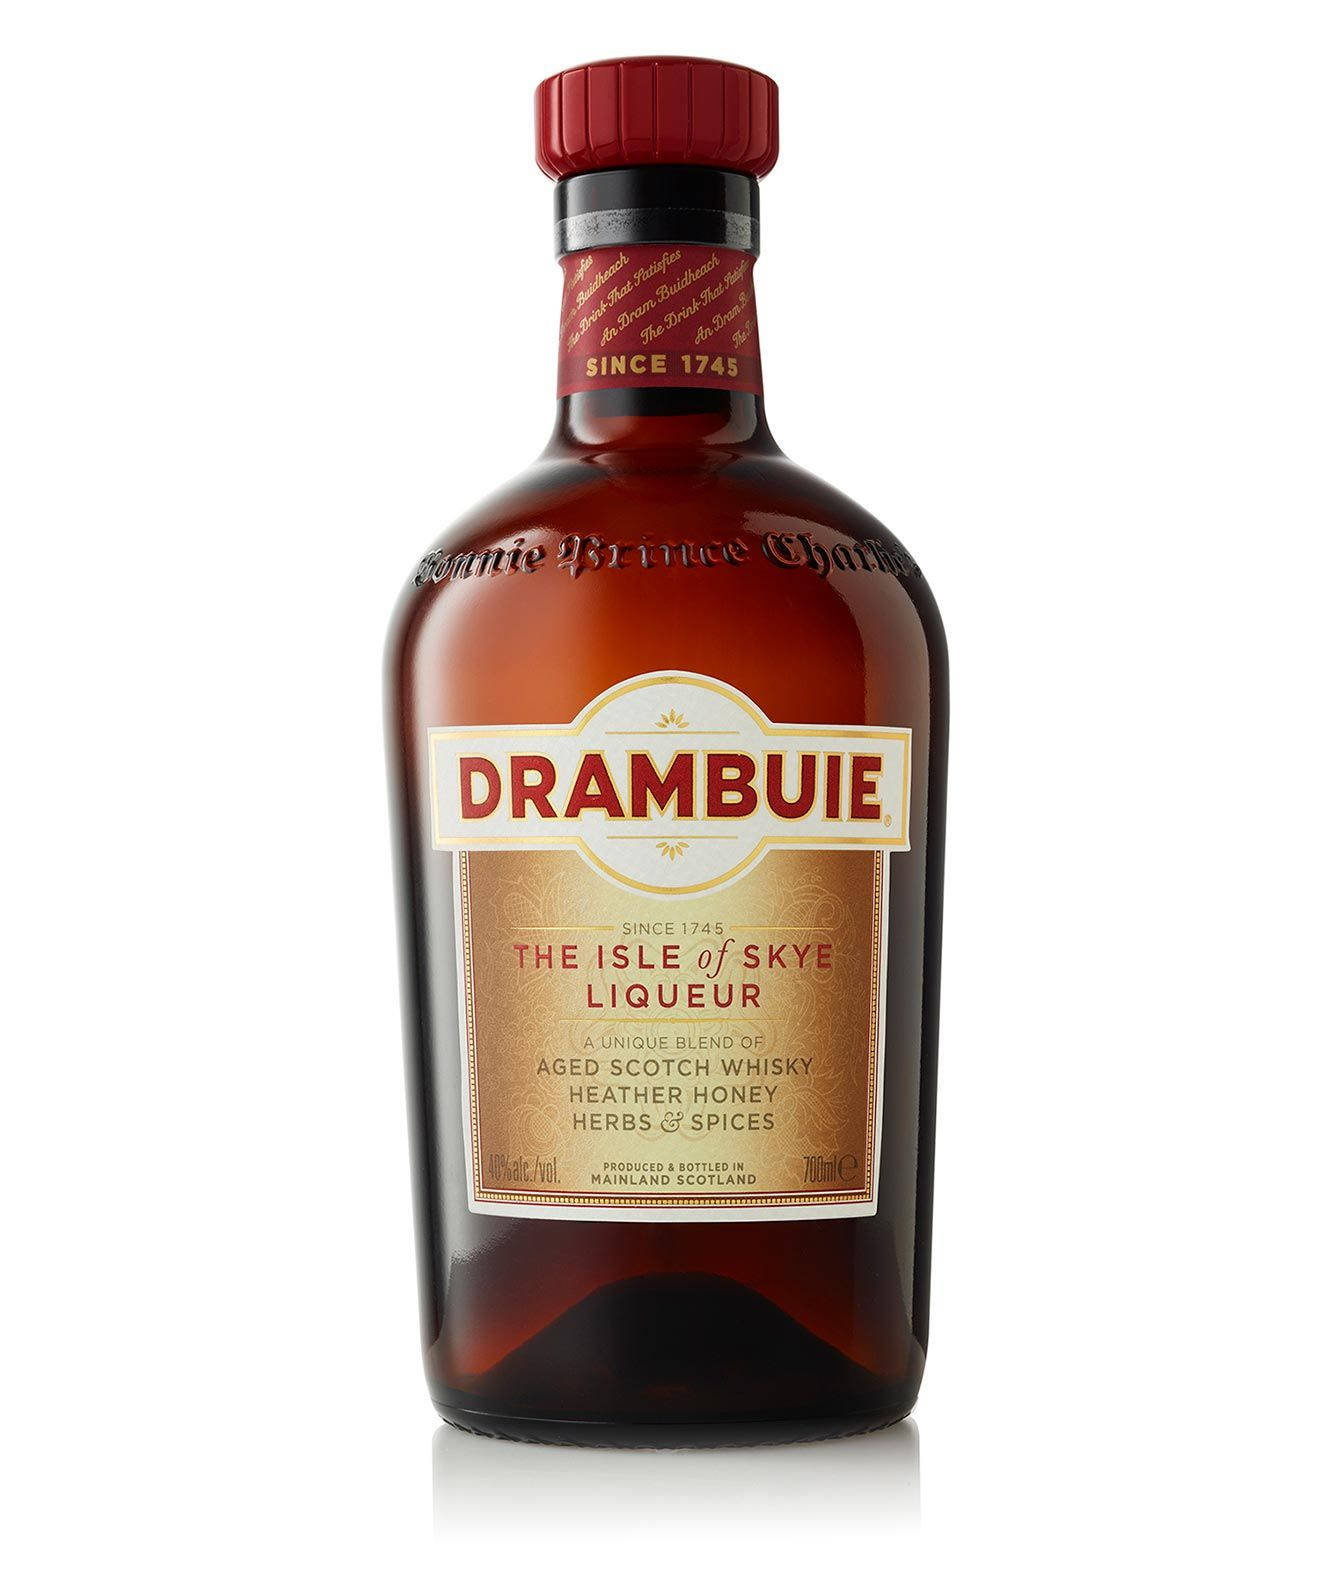 Exquisite Elegance of Drambuie Scotch Whisky Wallpaper